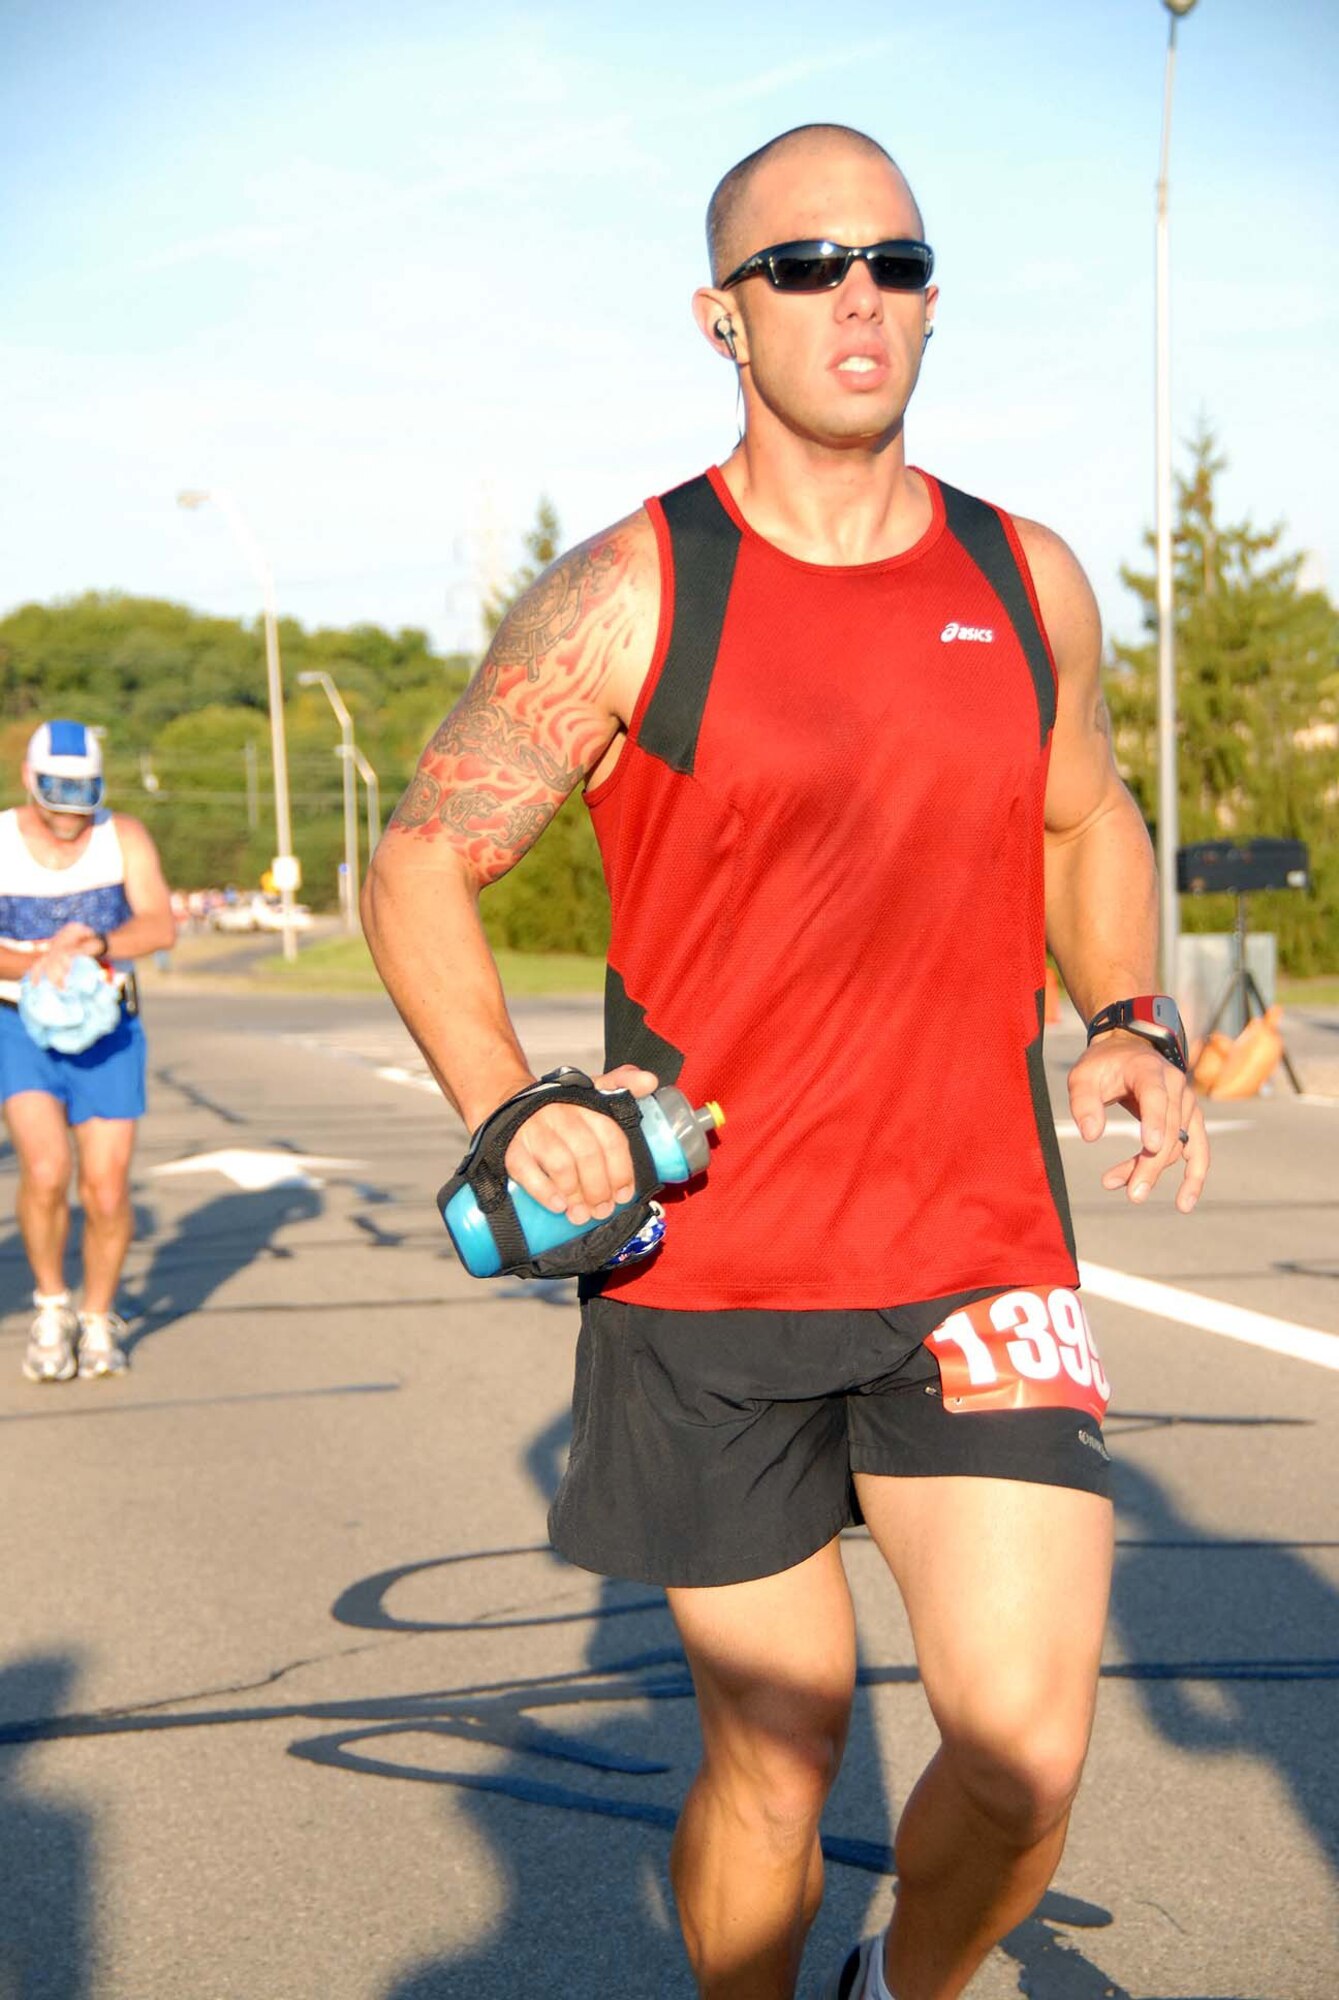 Staff Sgt. William Mavity,325th Civil Engineer Squadron Fire Protection Specialist, ran in the full marathon at the 12th Annual Air Force Marathon Sept. 19 at Wright-Patterson Air Force Base. (Courtesy photo)